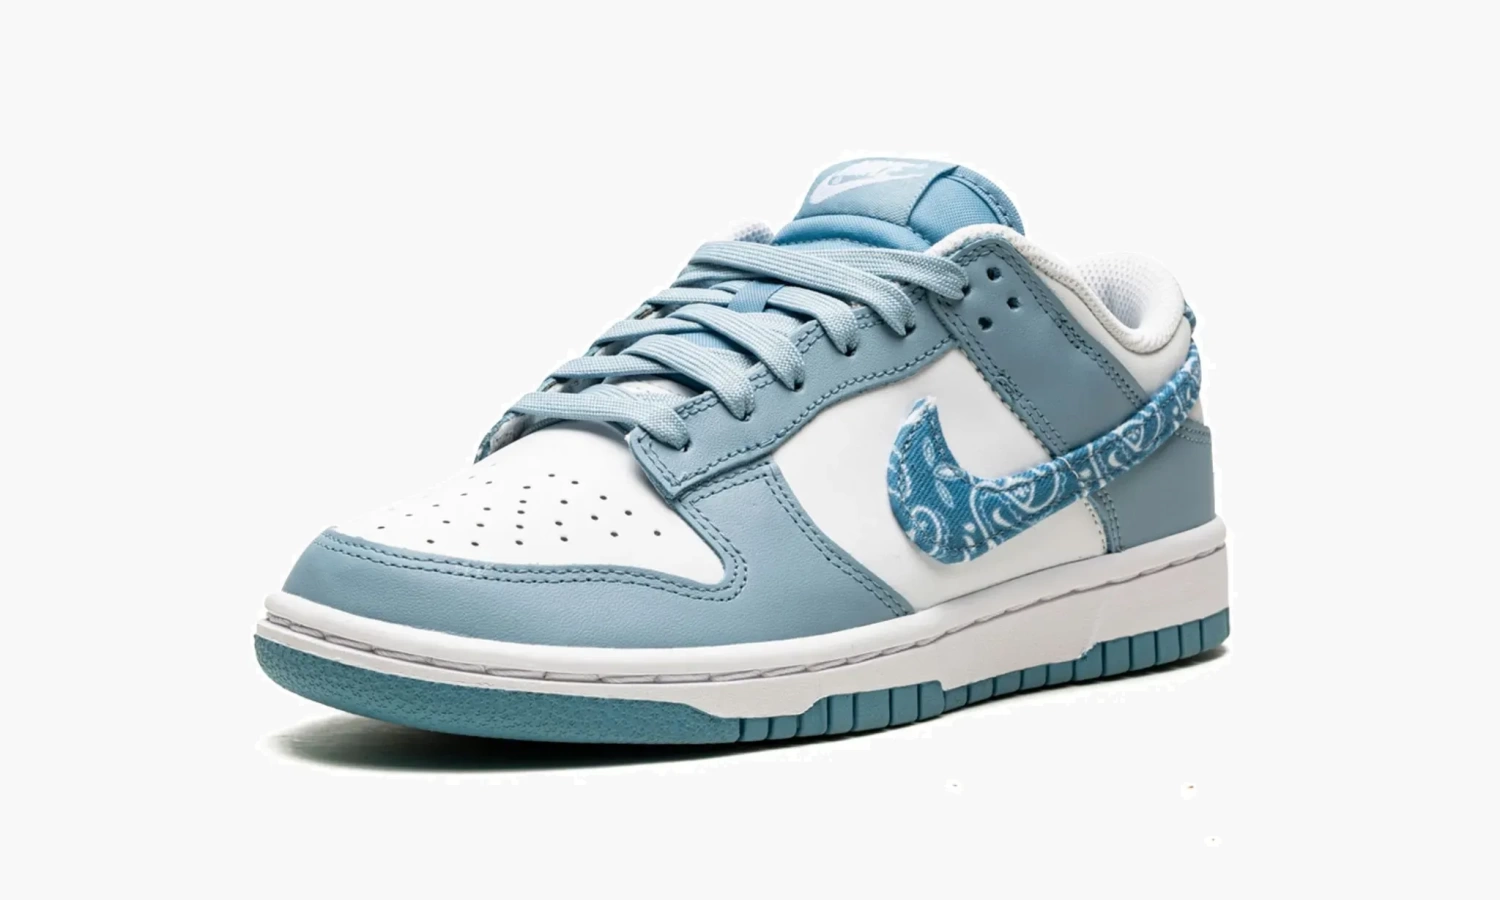 фото Dunk Low WMNS "Blue Paisley" (Nike Dunk)-DH4401 101